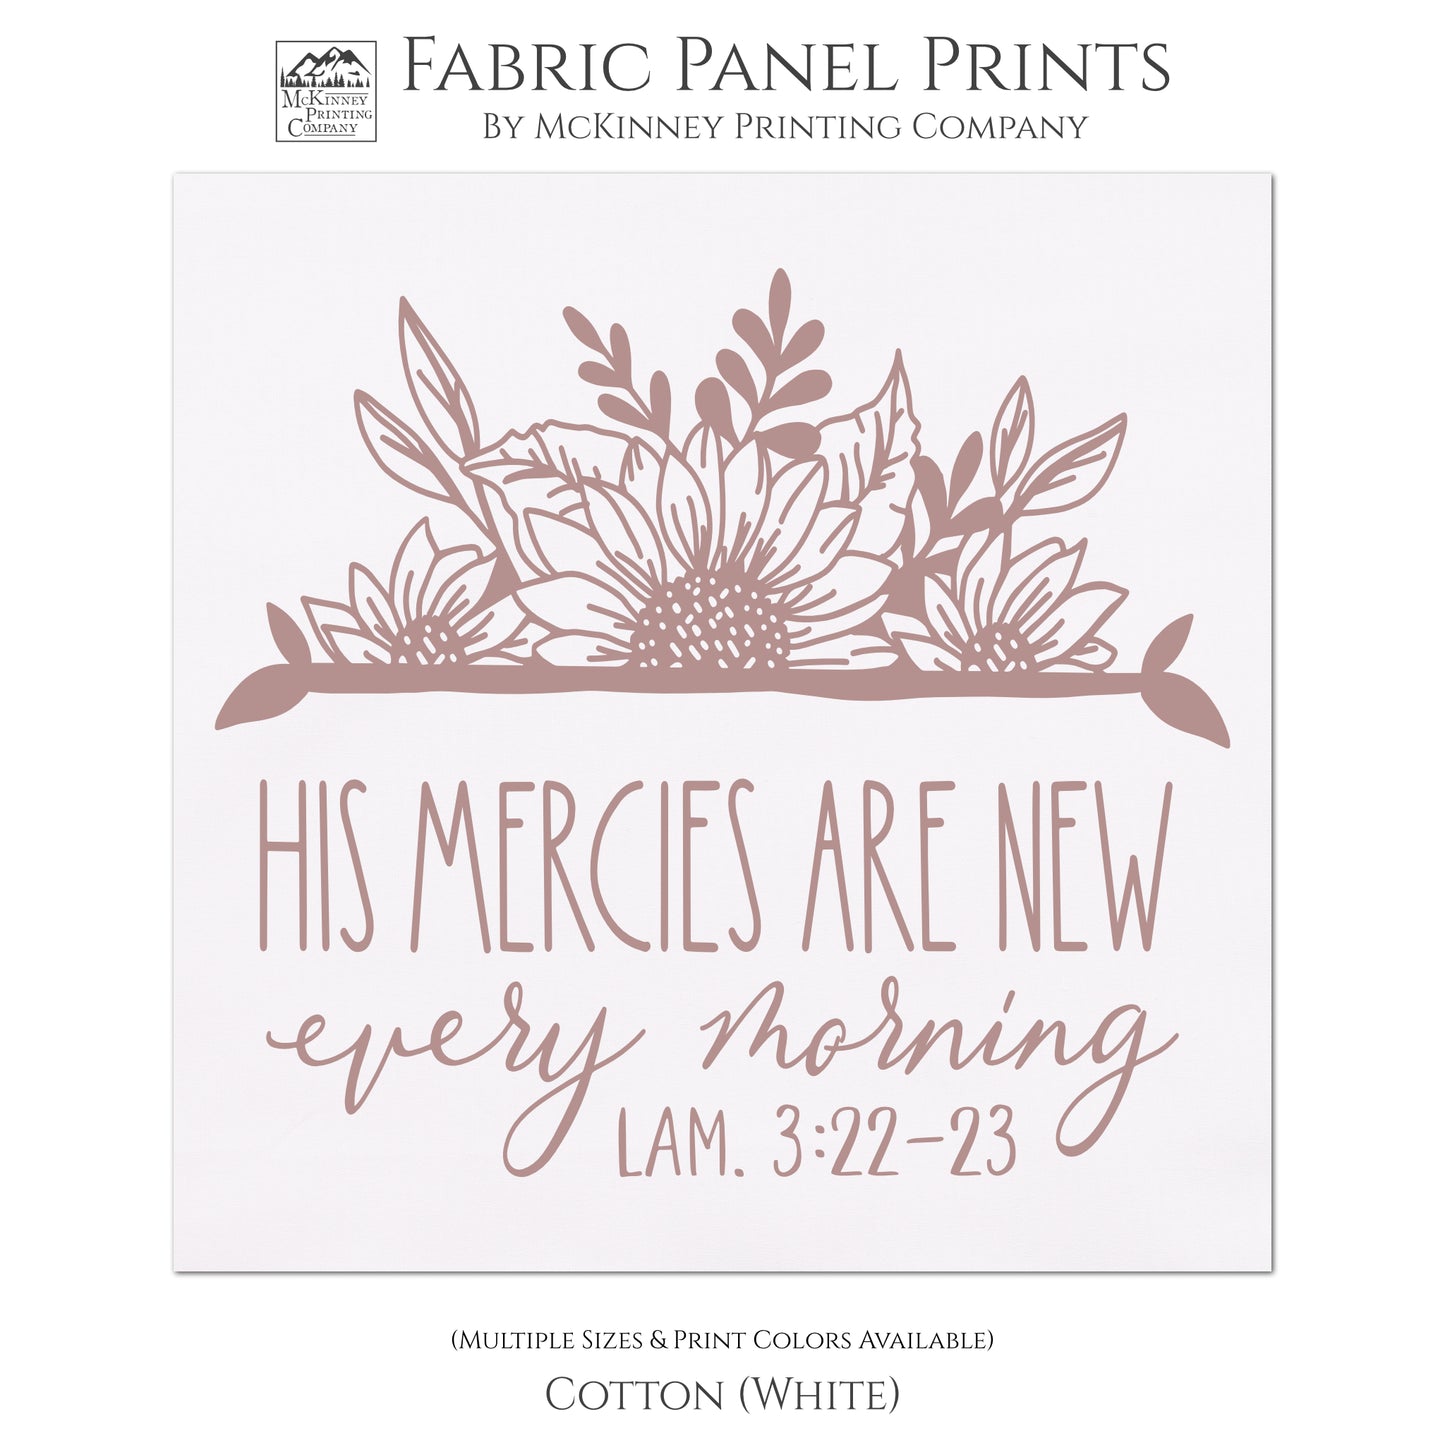 His mercies are new every morning - Lamentations 3 22, Quotes About Life, Inspirational, Religious Fabric, Christian Scripture, Fabric Panel Print, Quilt Block - Cotton, White